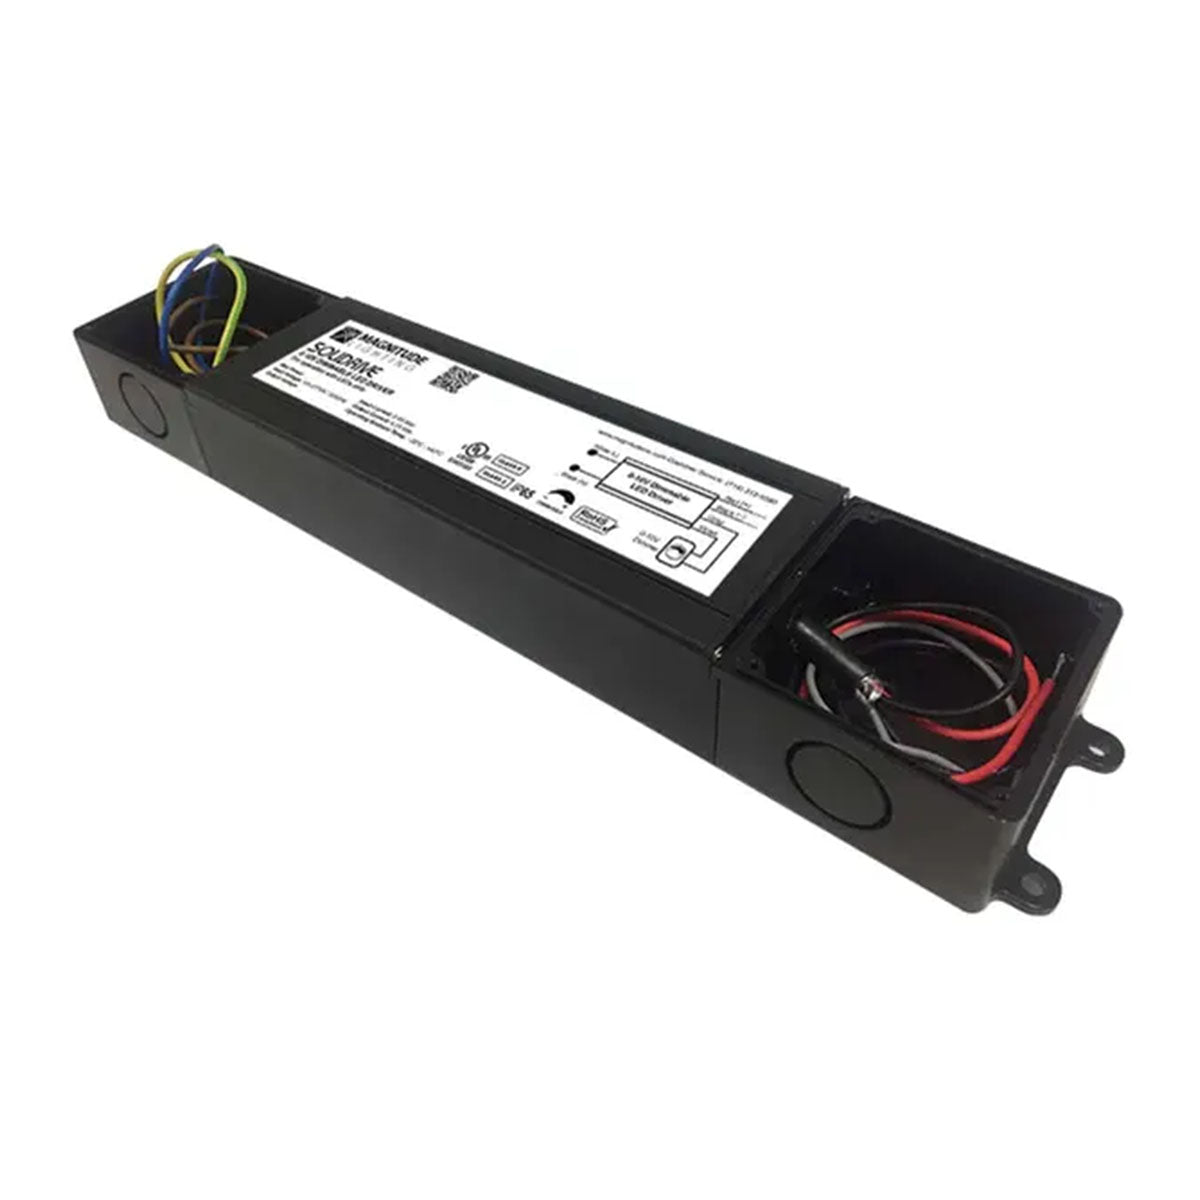 SOLIDRIVE 96 Watts, 24V DC LED Driver With Junction Box, 0-10V Dimming, 120-277V Input